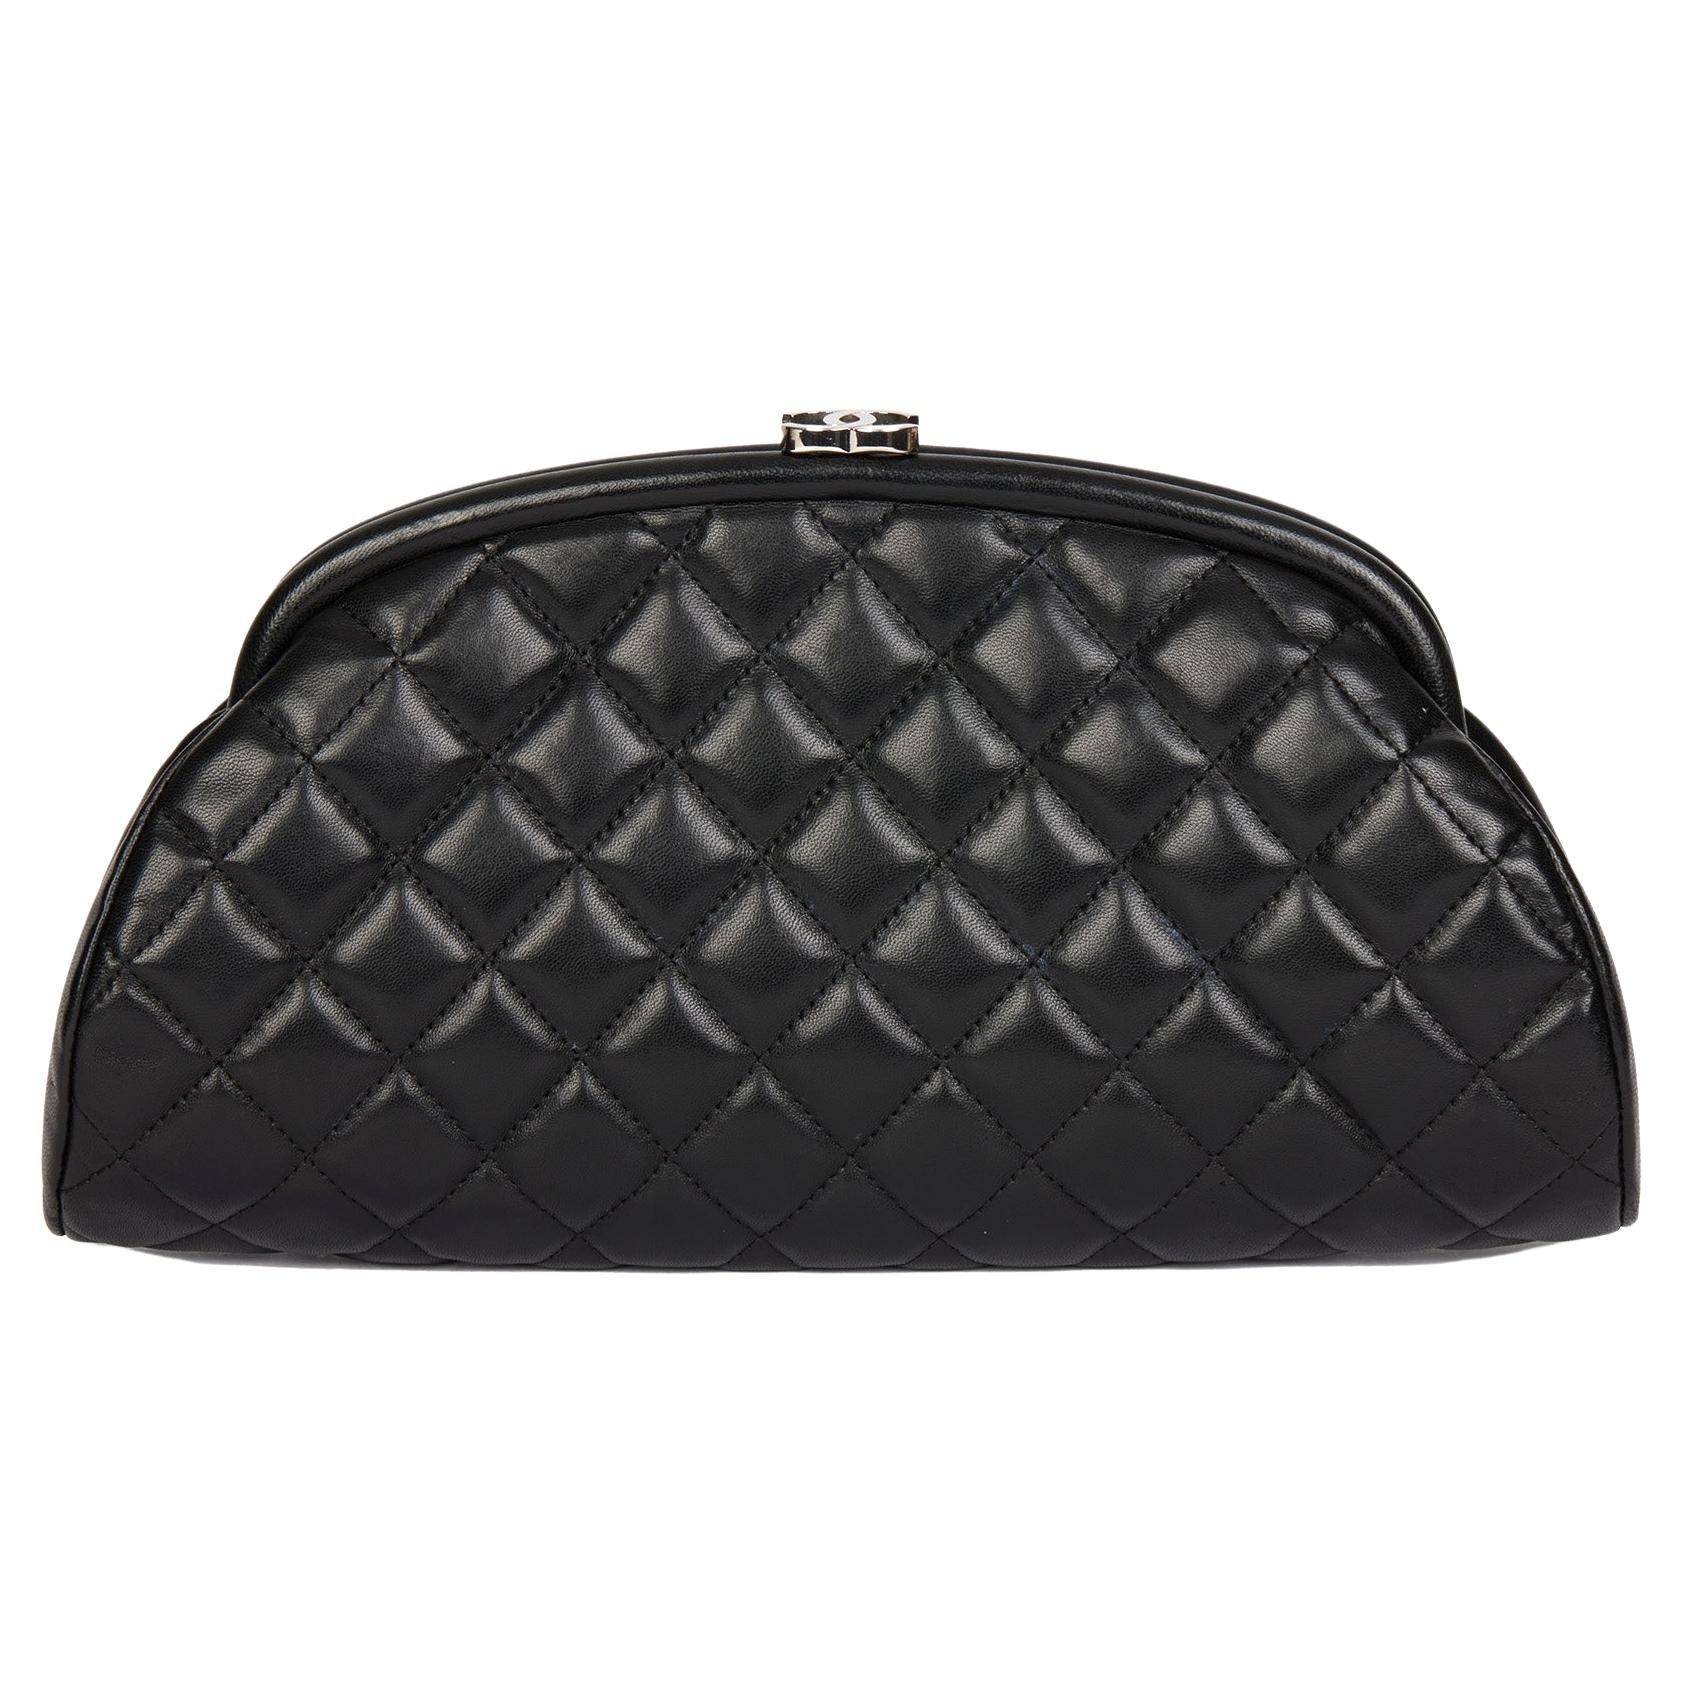 CHANEL Black Quilted Lambskin Timeless Clutch